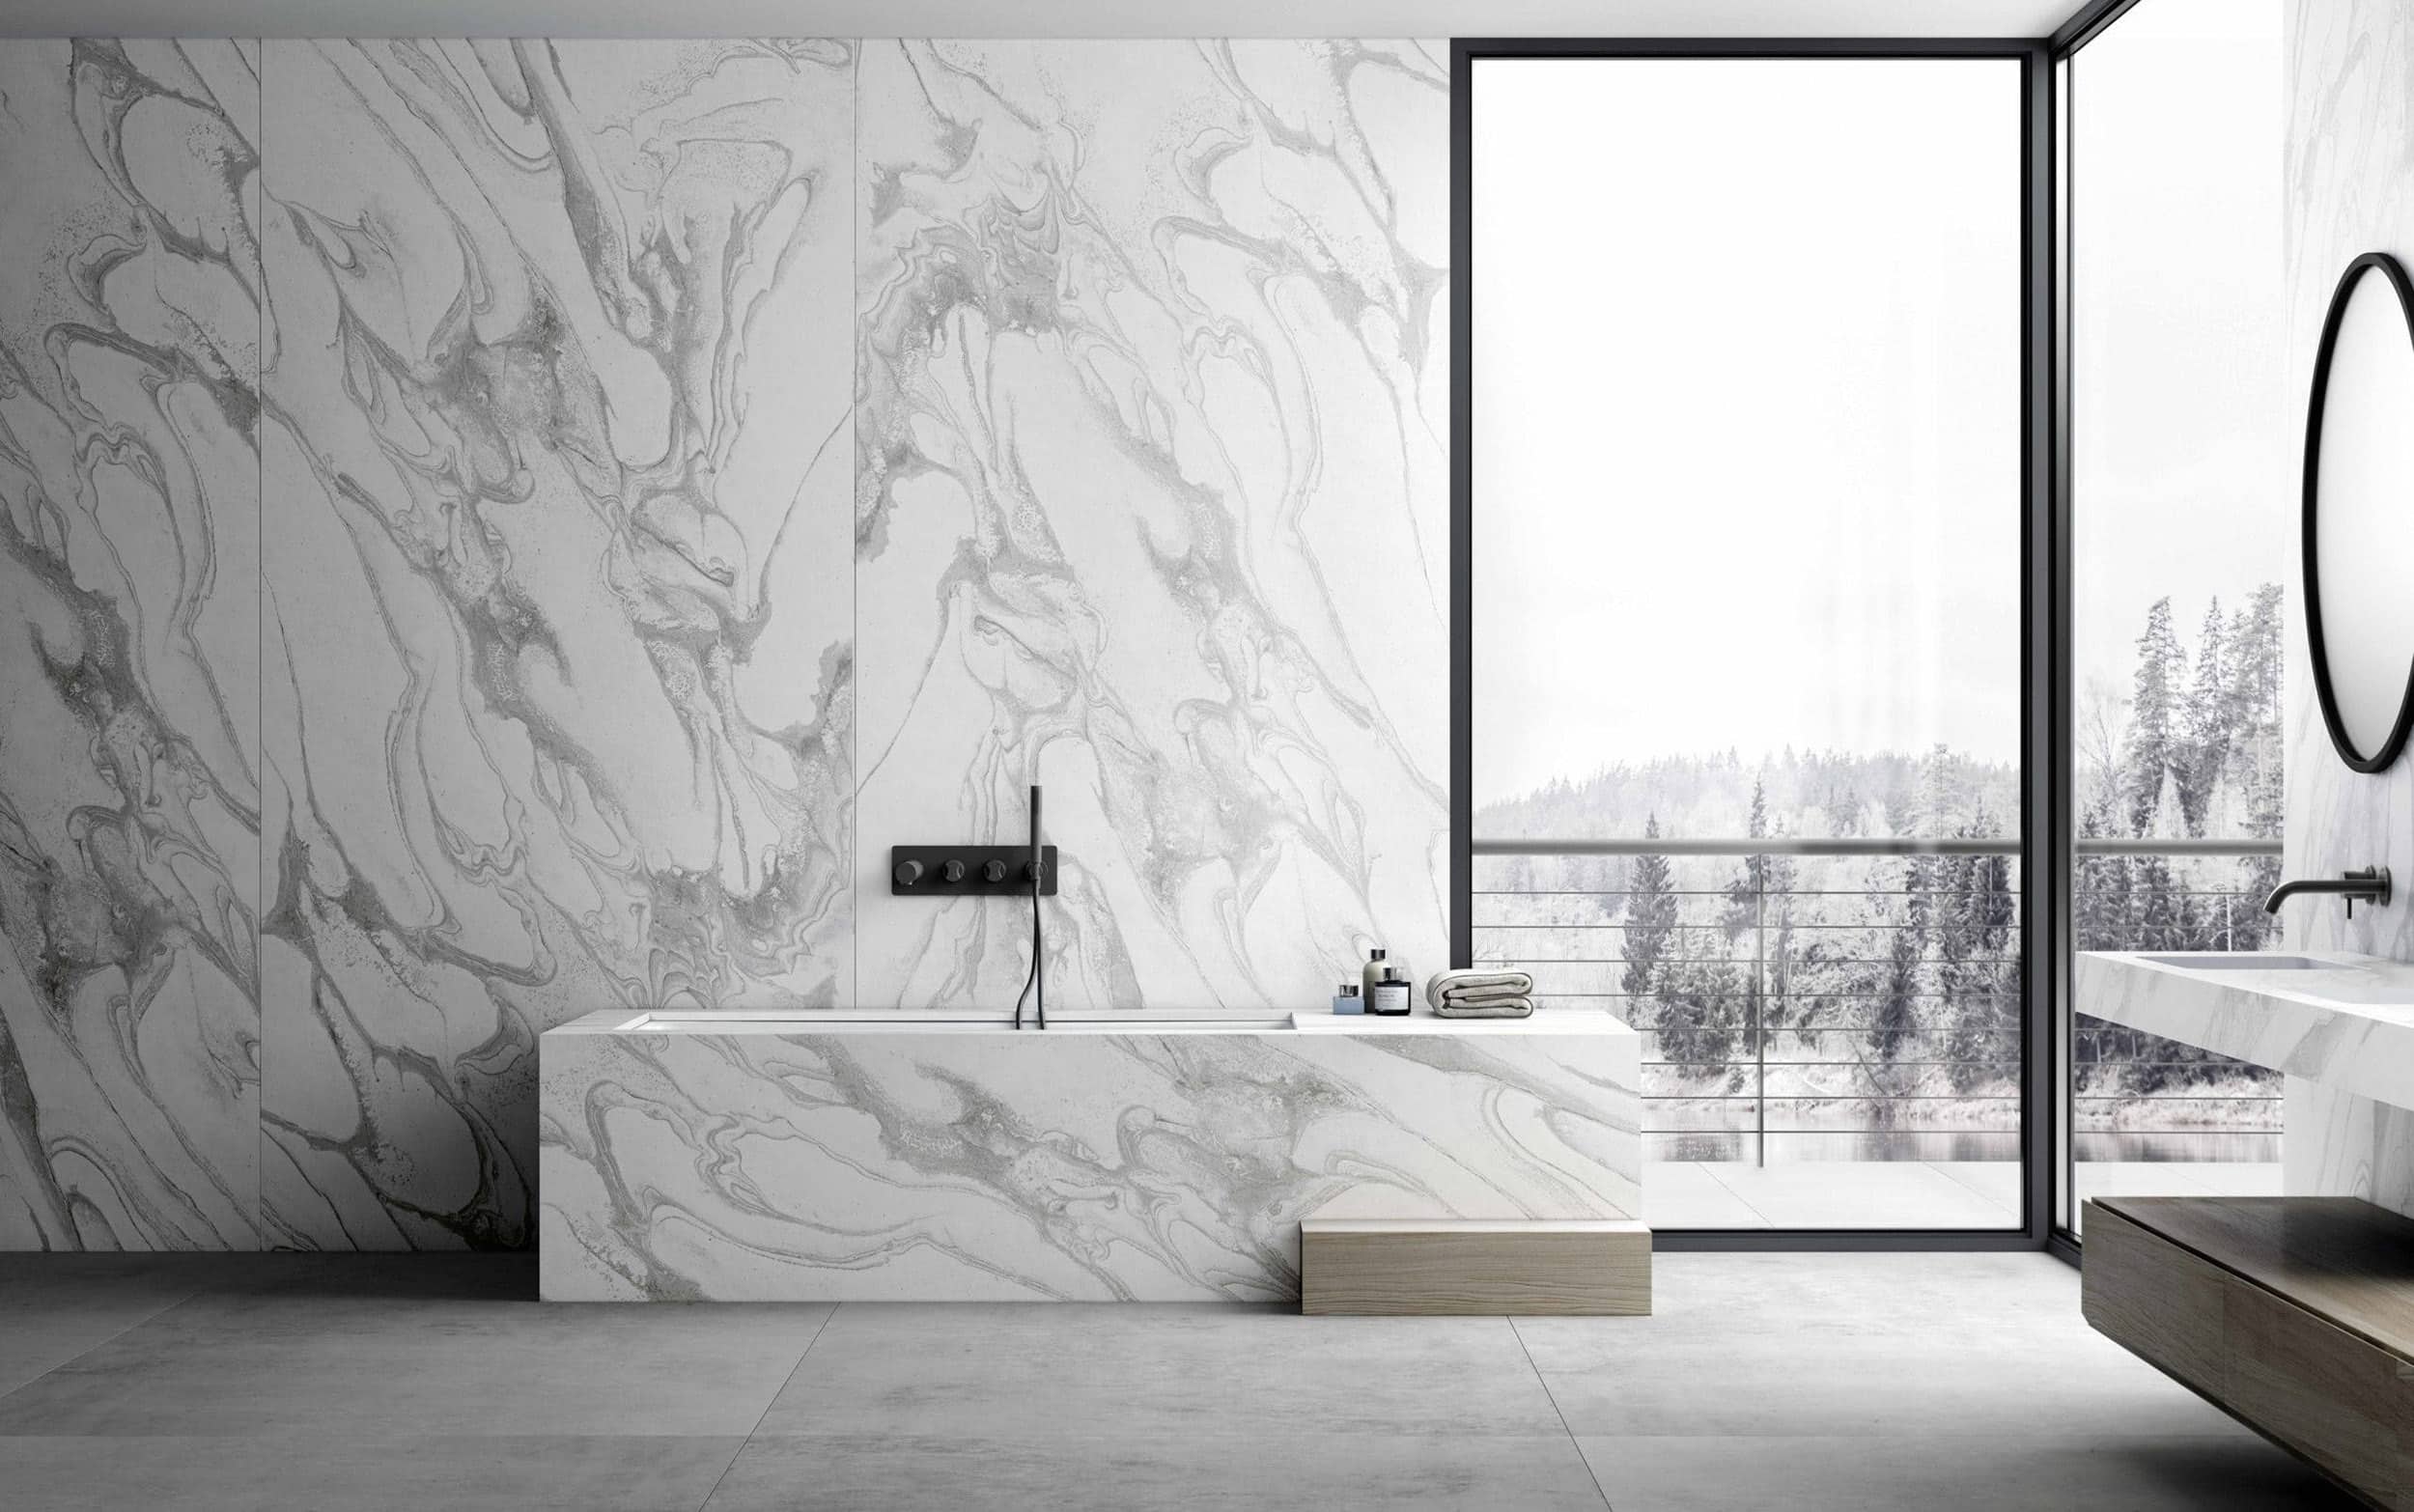 Ordinary becomes extraordinary with modern surfaces for counter, floor, and wall featuring Dekton.